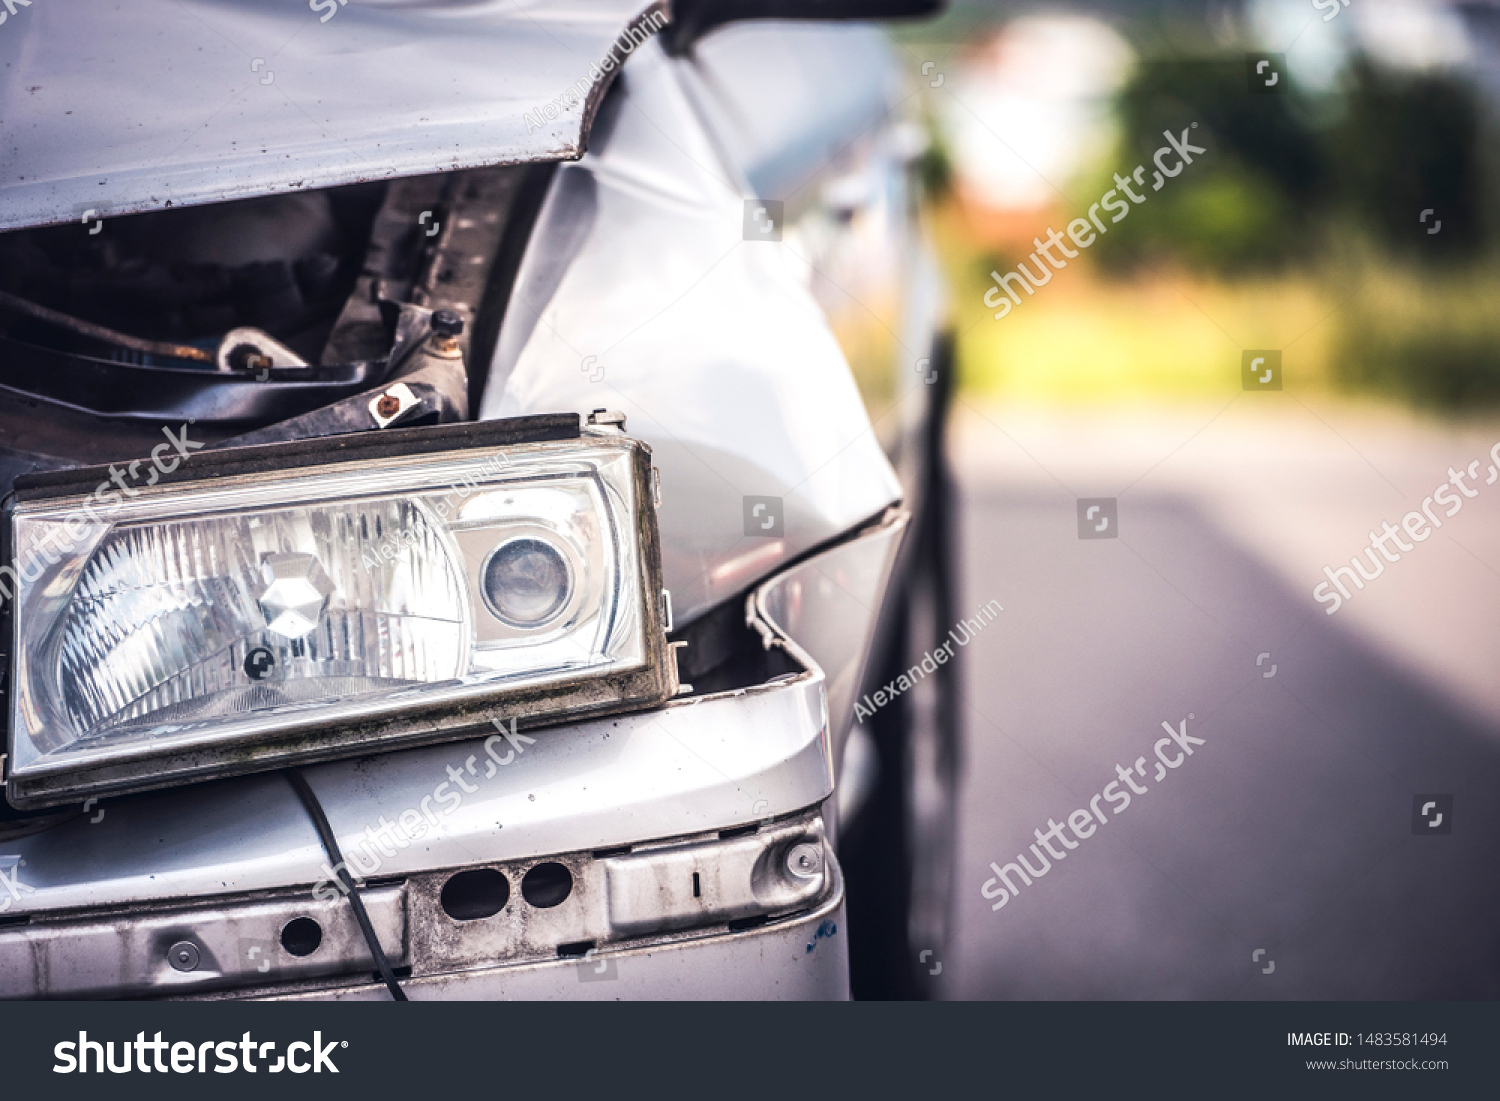 car crash accident on street, damaged automobiles after collision in city #1483581494